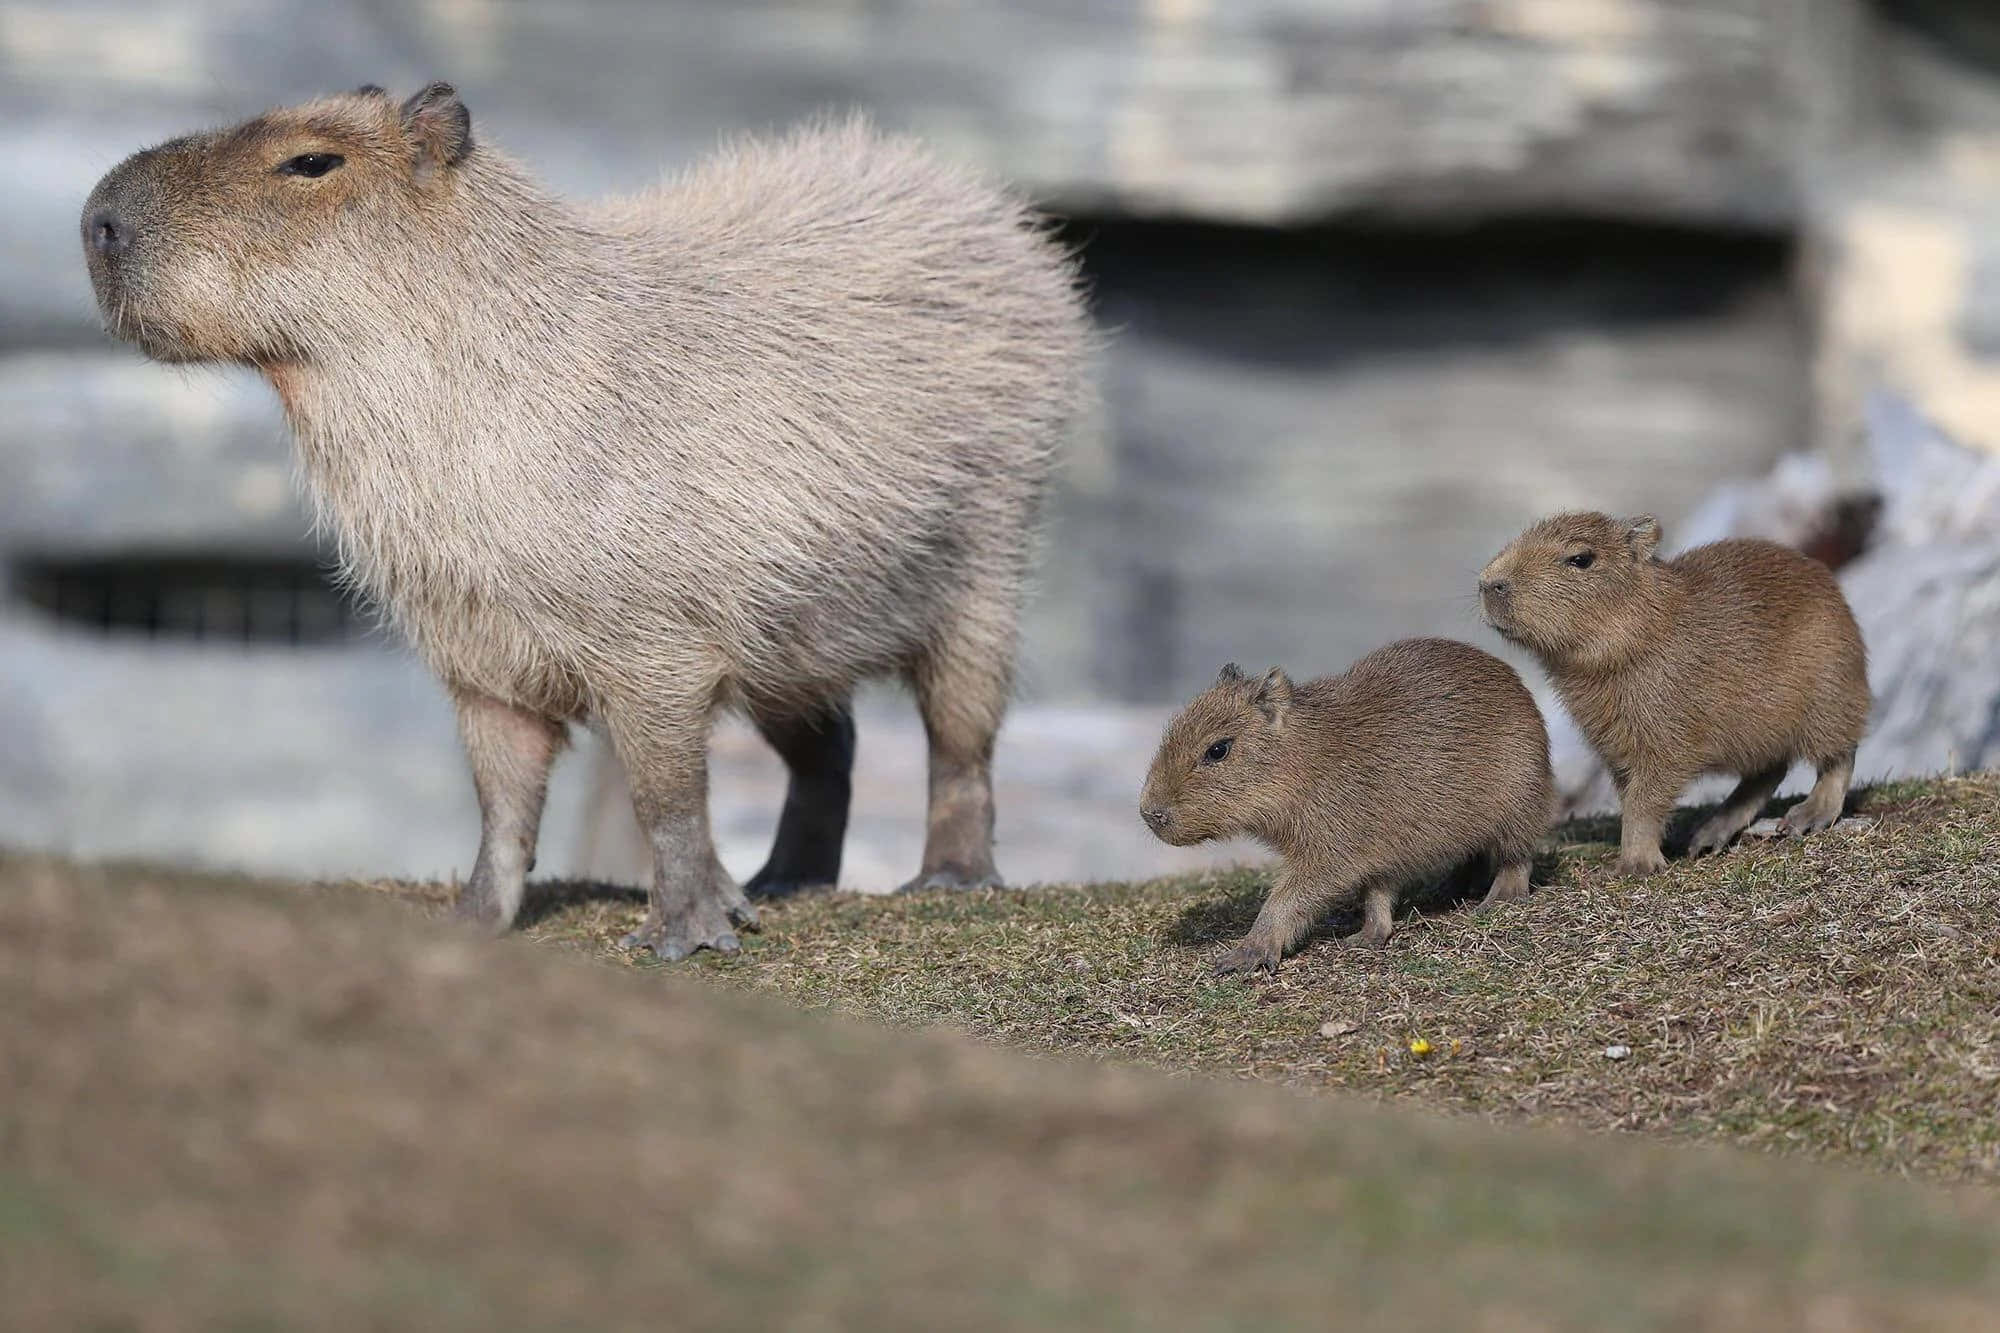 capybaras and their babies walking on a grassy field